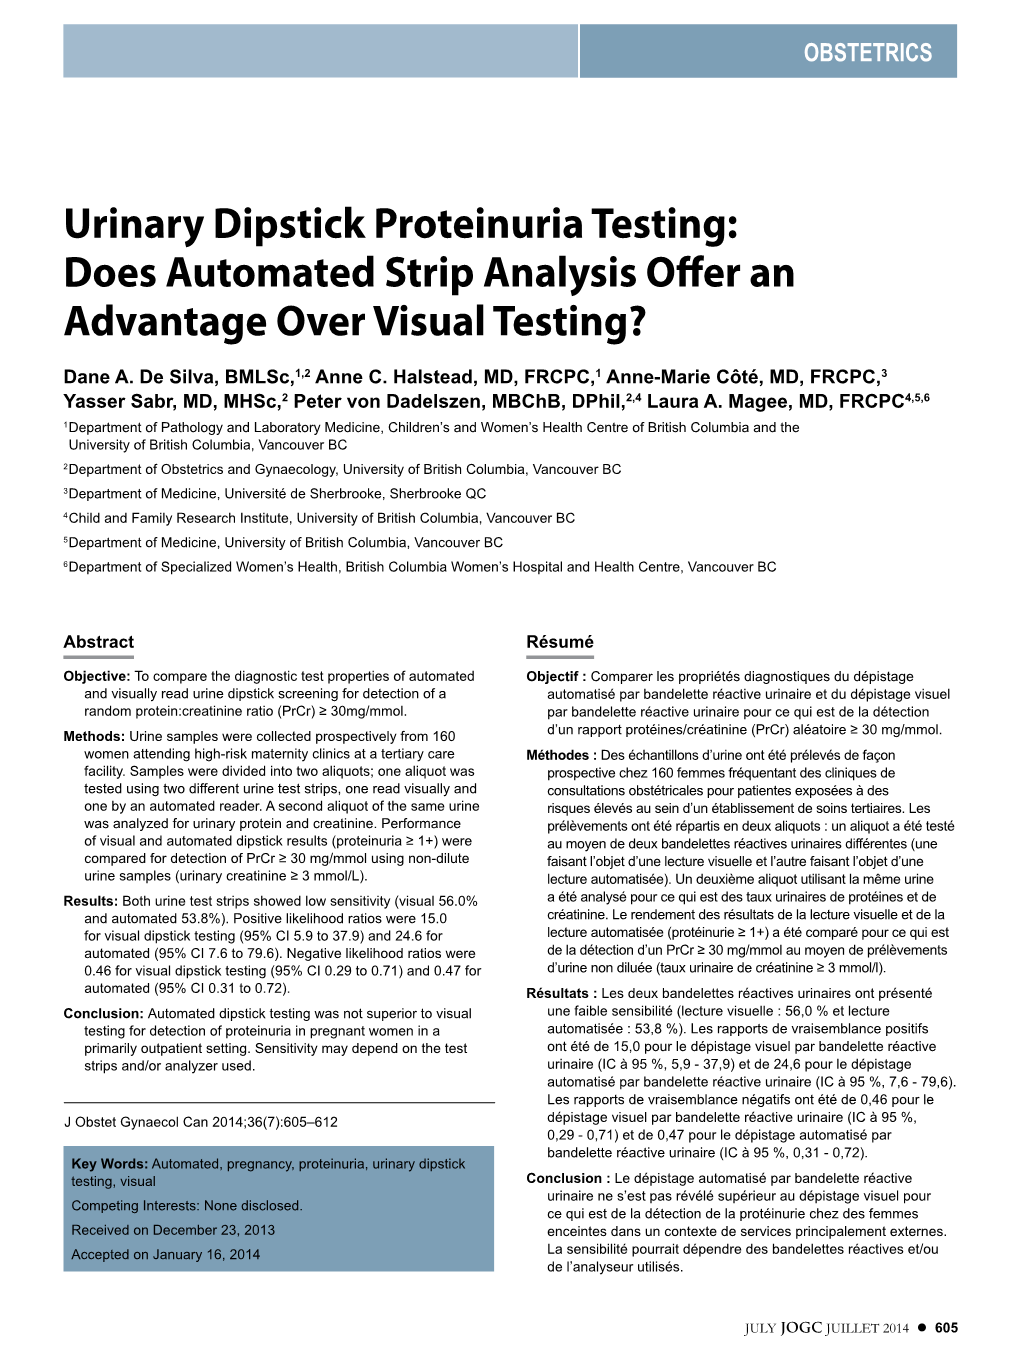 Urinary Dipstick Proteinuria Testing: Does Automated Strip Analysis Offer an Advantage Over Visual Testing?